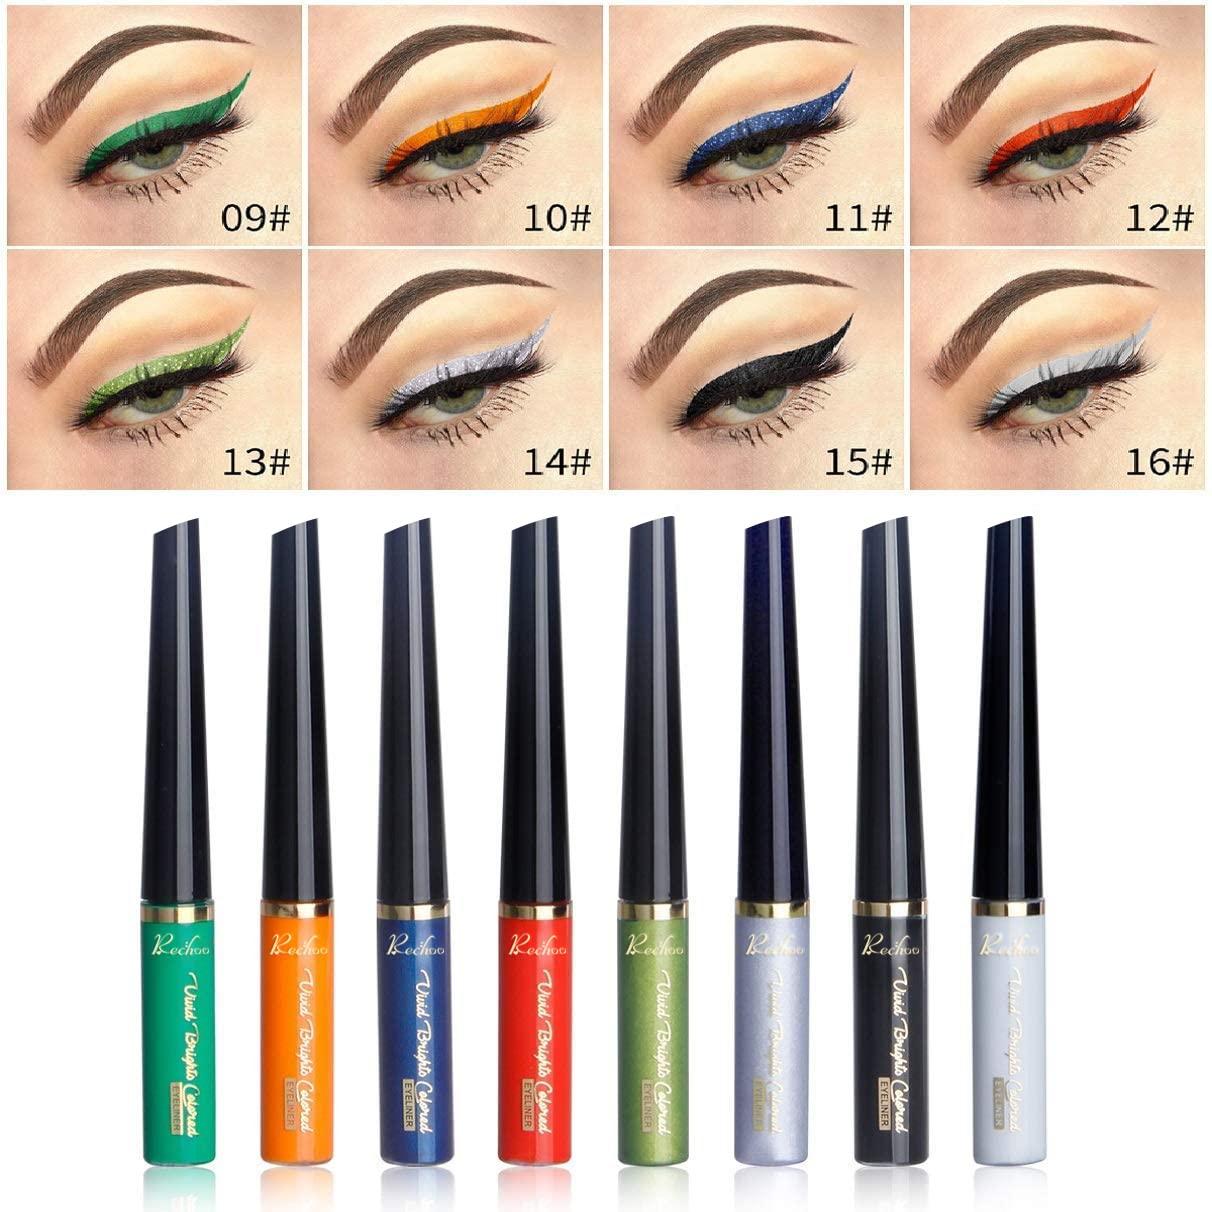 Go Ho 16 Colors Water Activated Eyeliner Palette,Highly Pigmented Brig